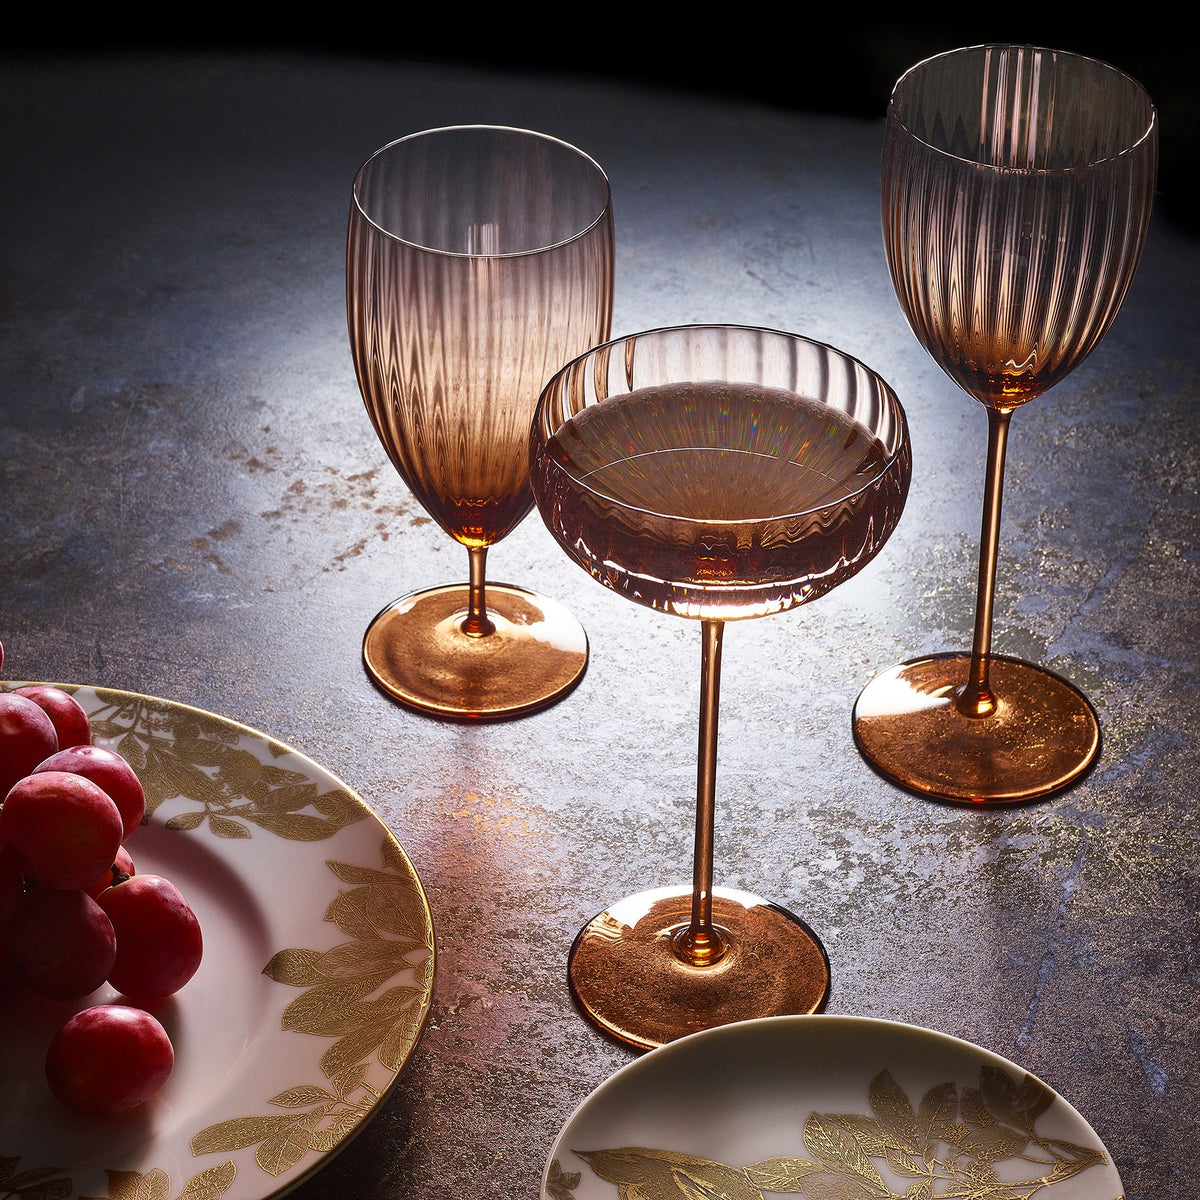 Quinn Amber Mouthblown Crystal Stemware from Caskata, featuring coupe, everyday and white wine shapes accompanied by gold Arbor dinnerware.